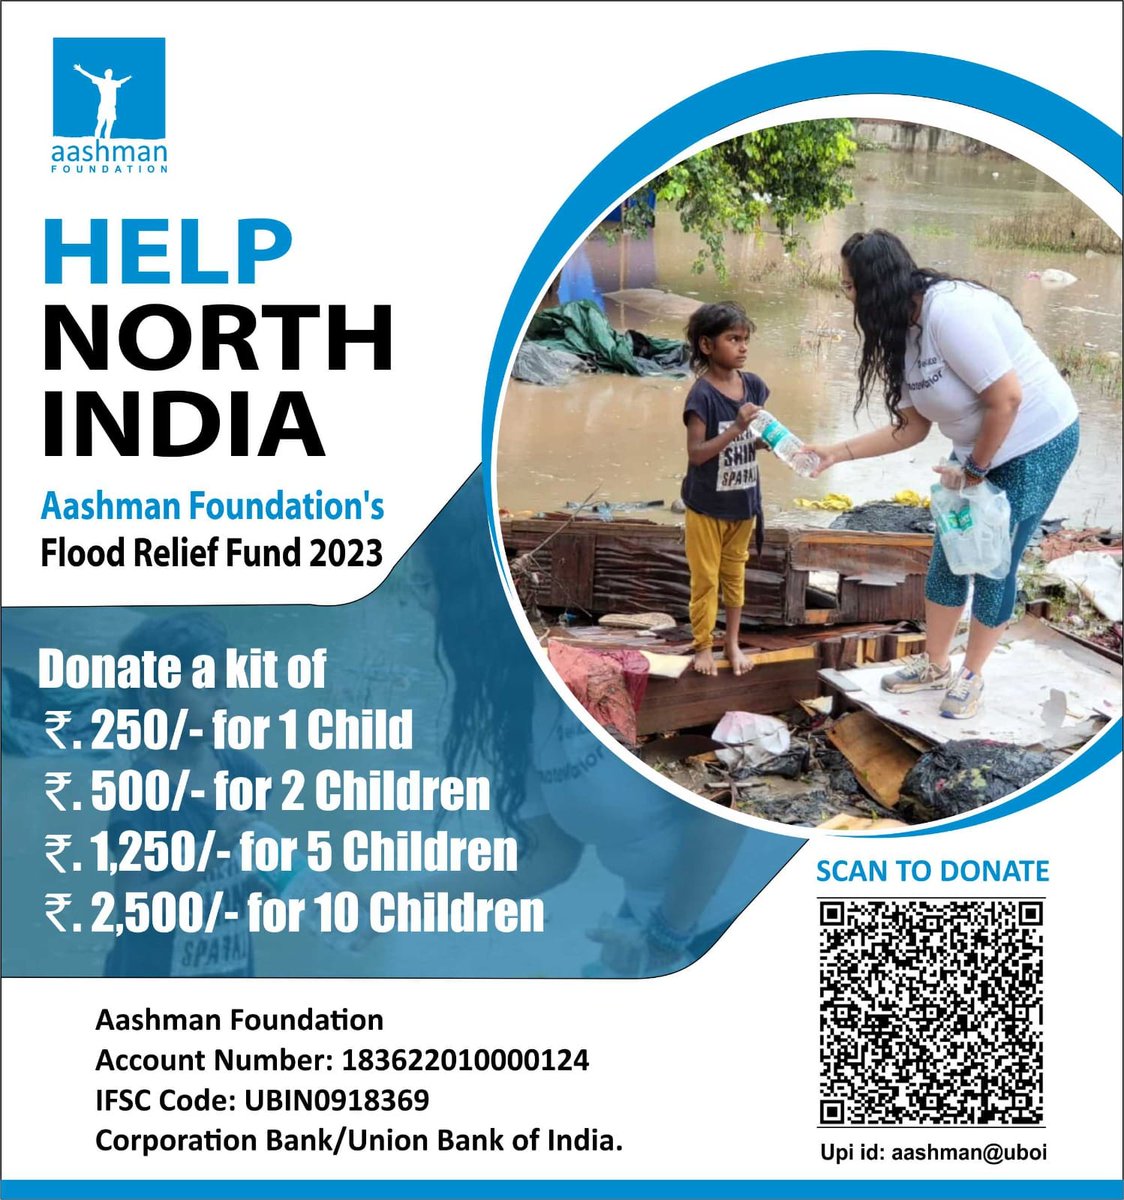 North India is in chaos as floods and landslides cause widespread devastation. Thousands of people have been displaced, stranded and isolated. Homes have been submerged, lives lost and dreams shattered. The visuals from North India are truly terrifying. This crisis callsforaction